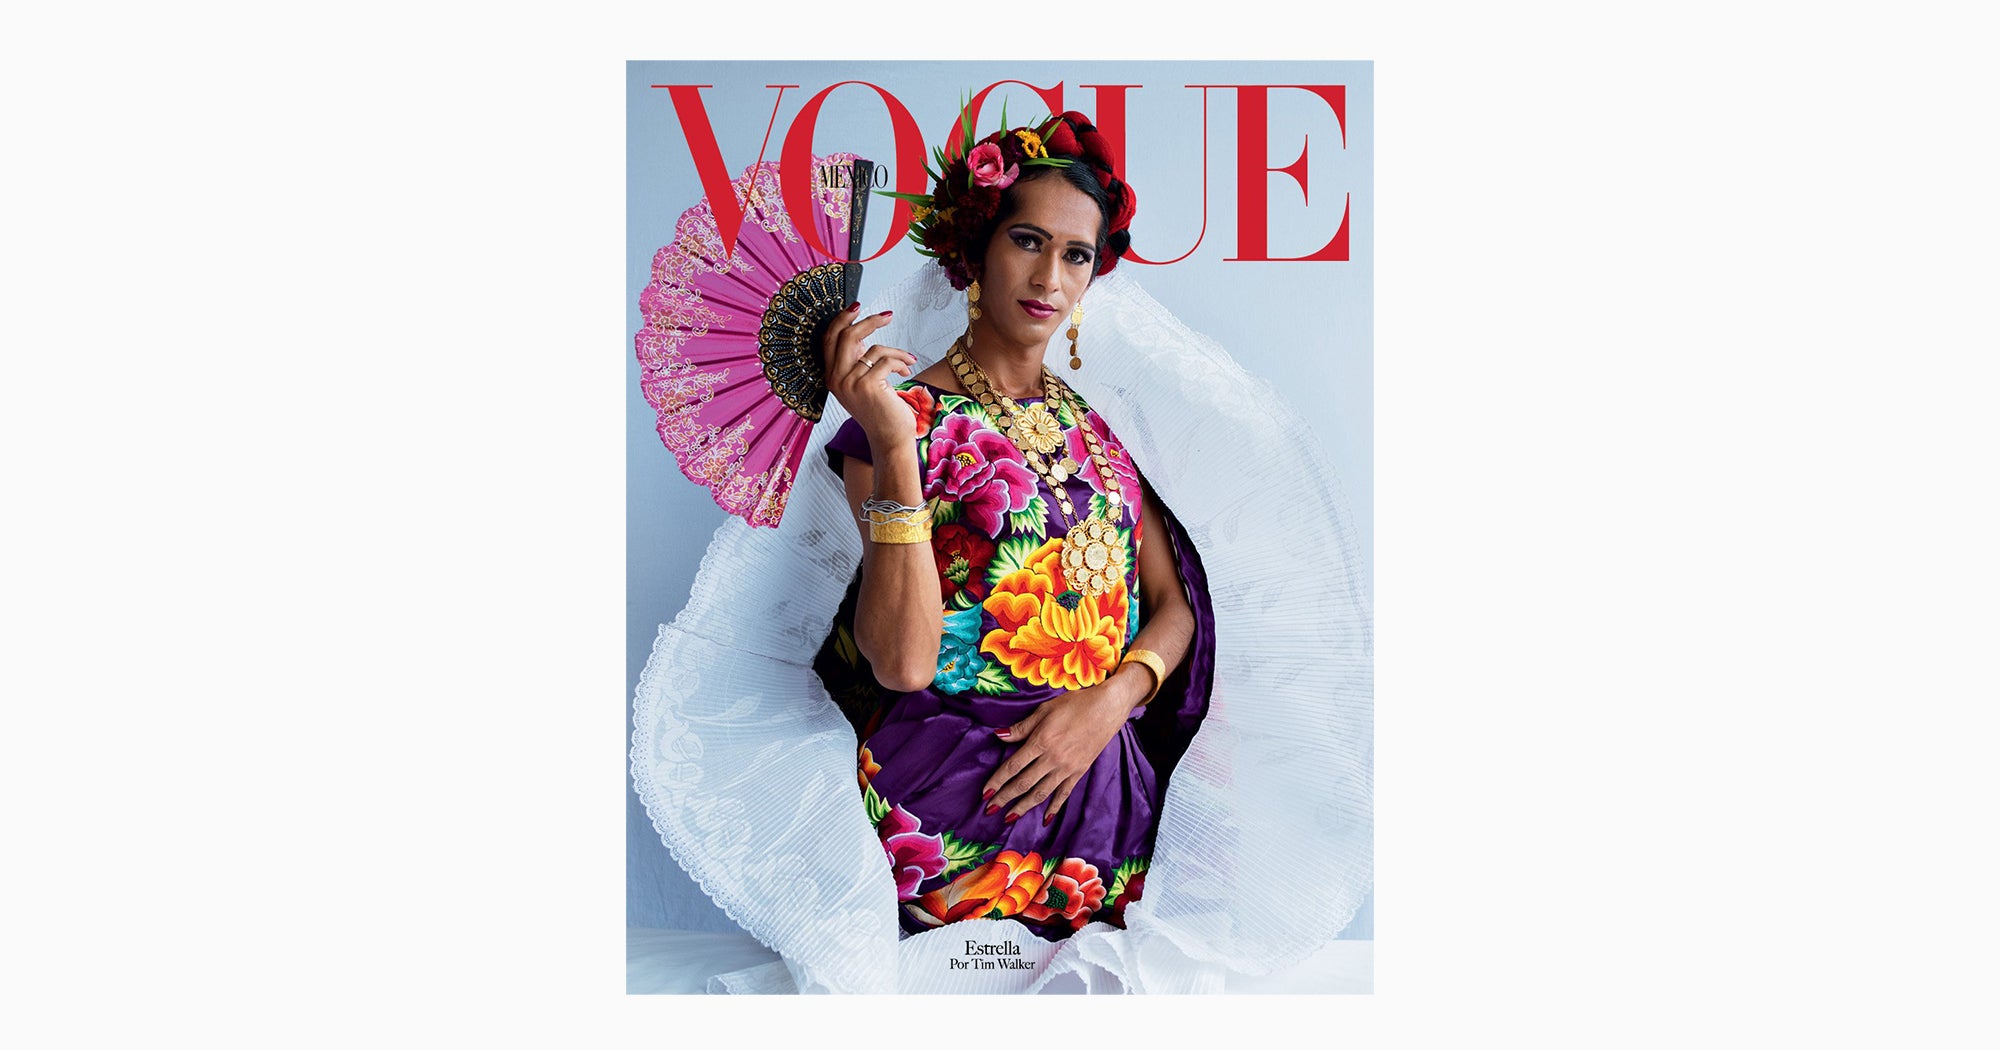 Vogue’s New Cover Features Mexico’s Third Gender